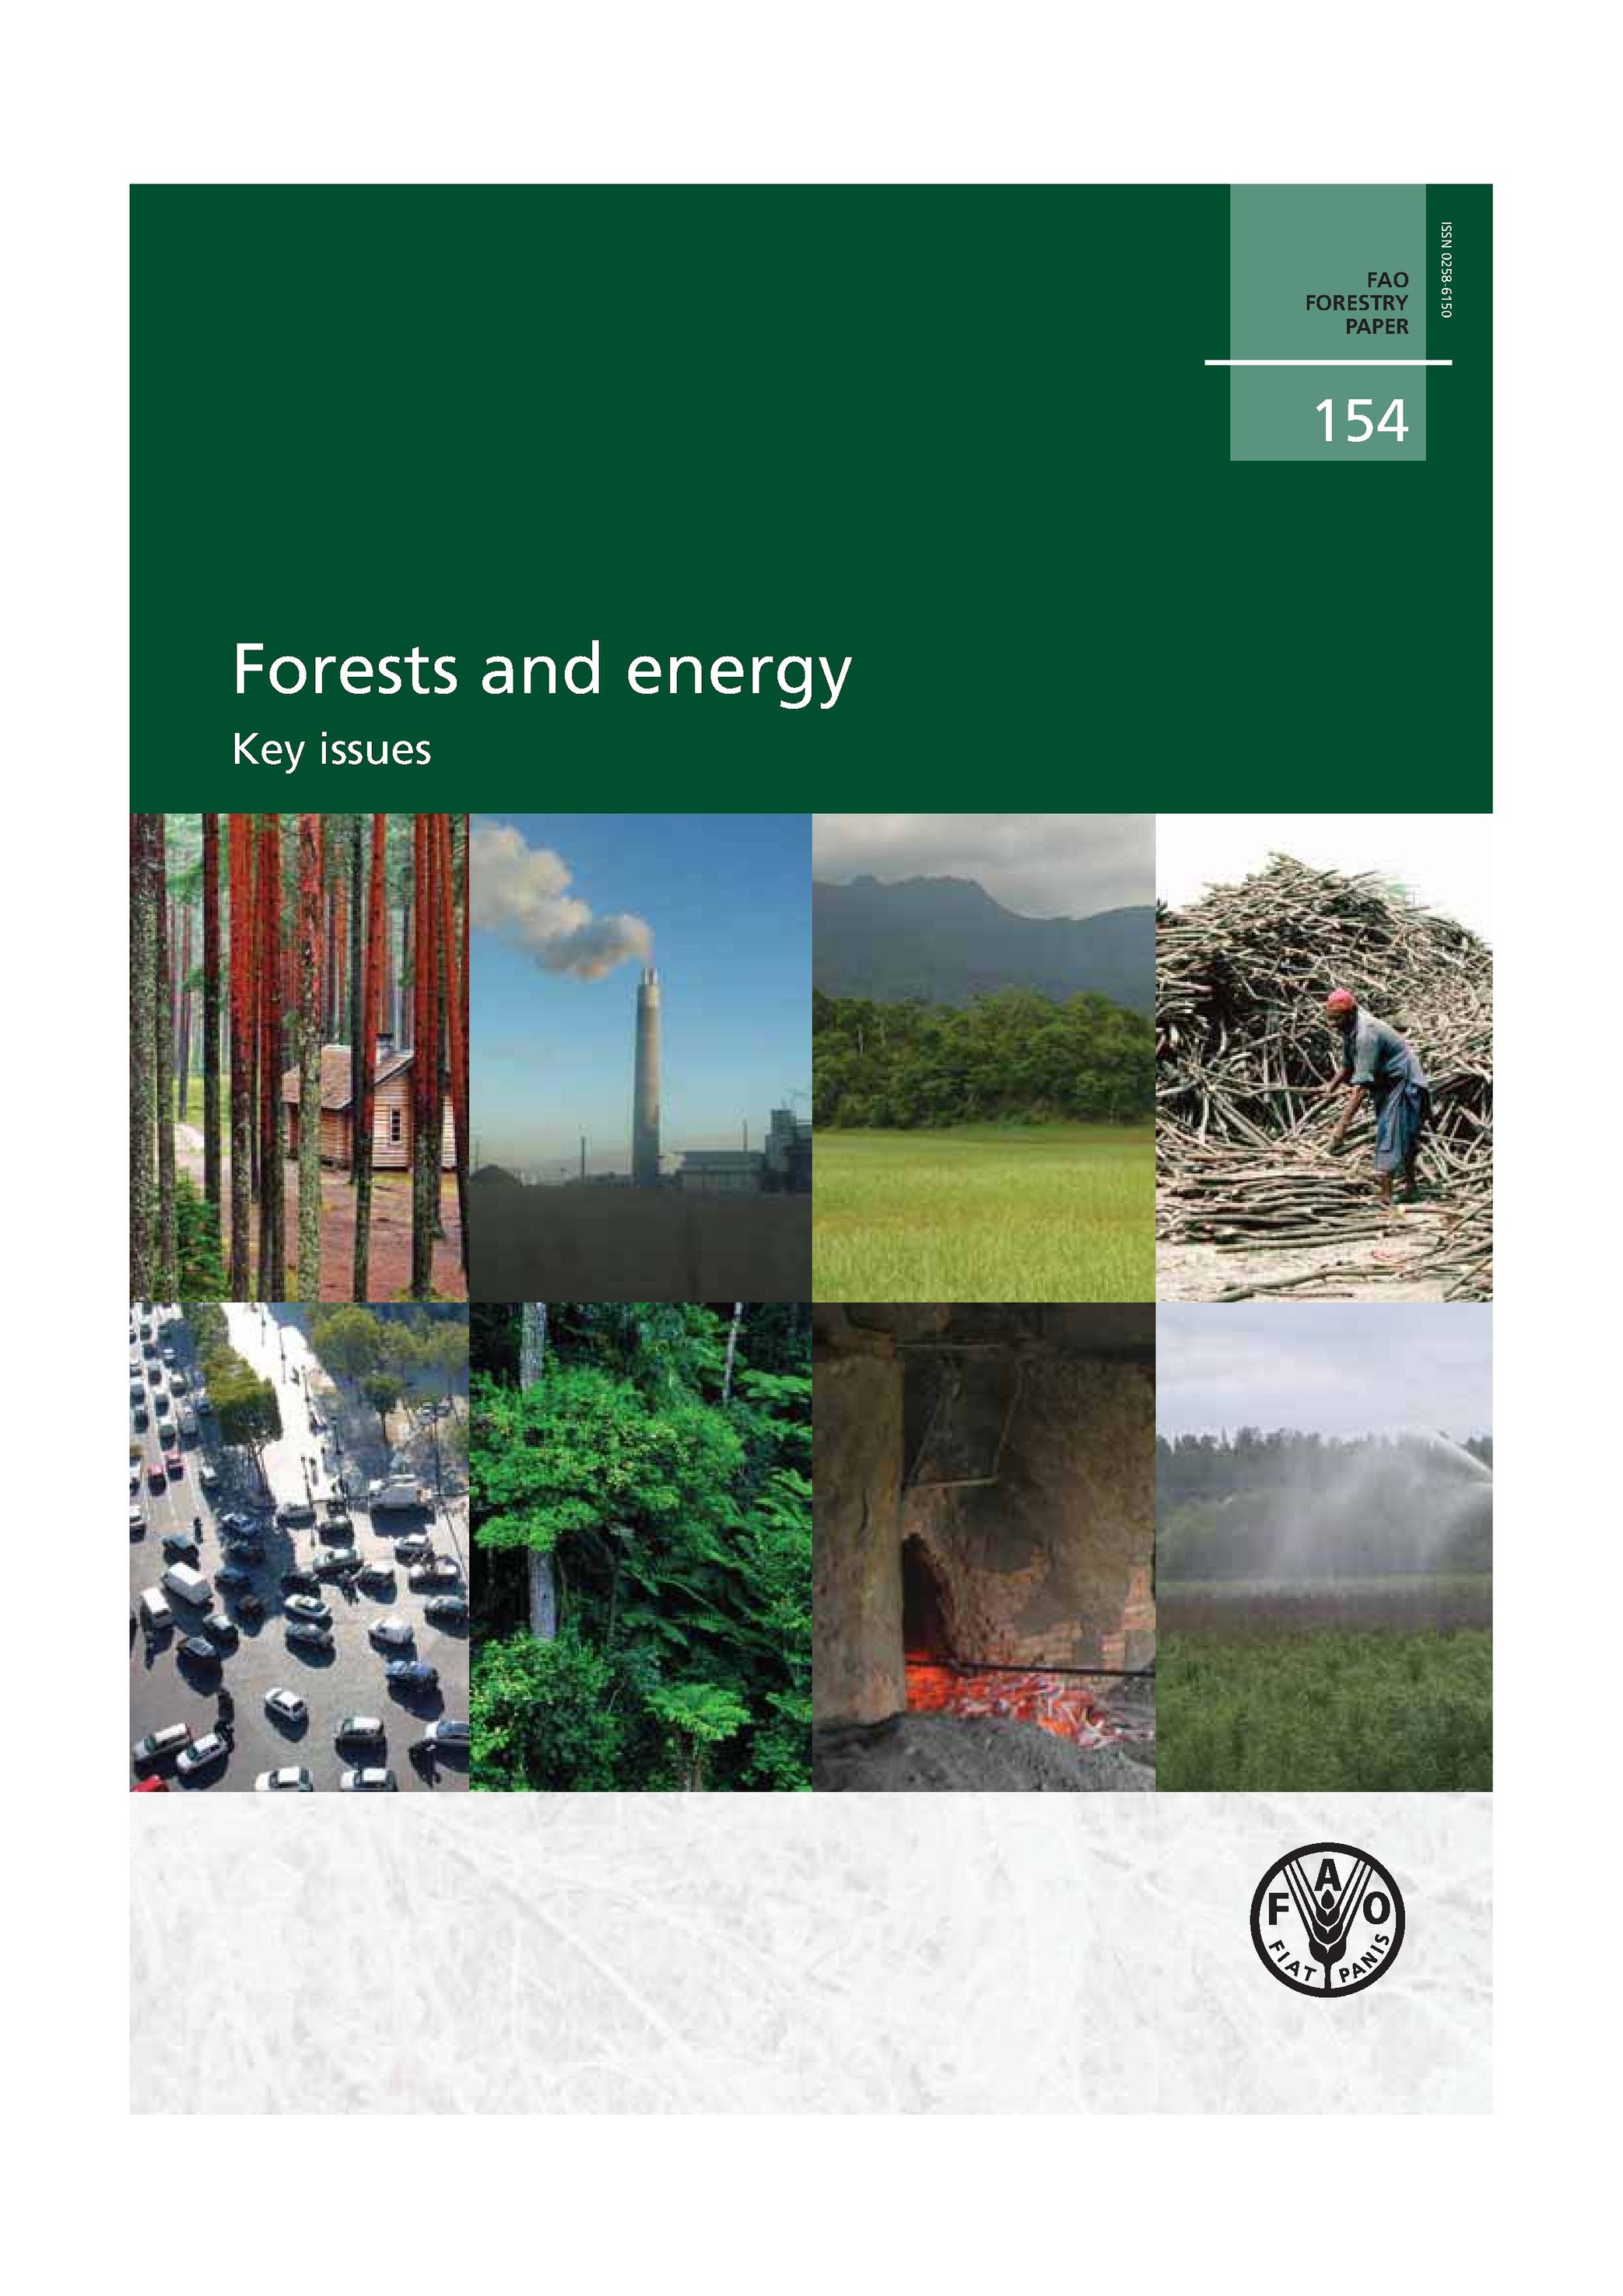 FAO (2008), Forests and Energy